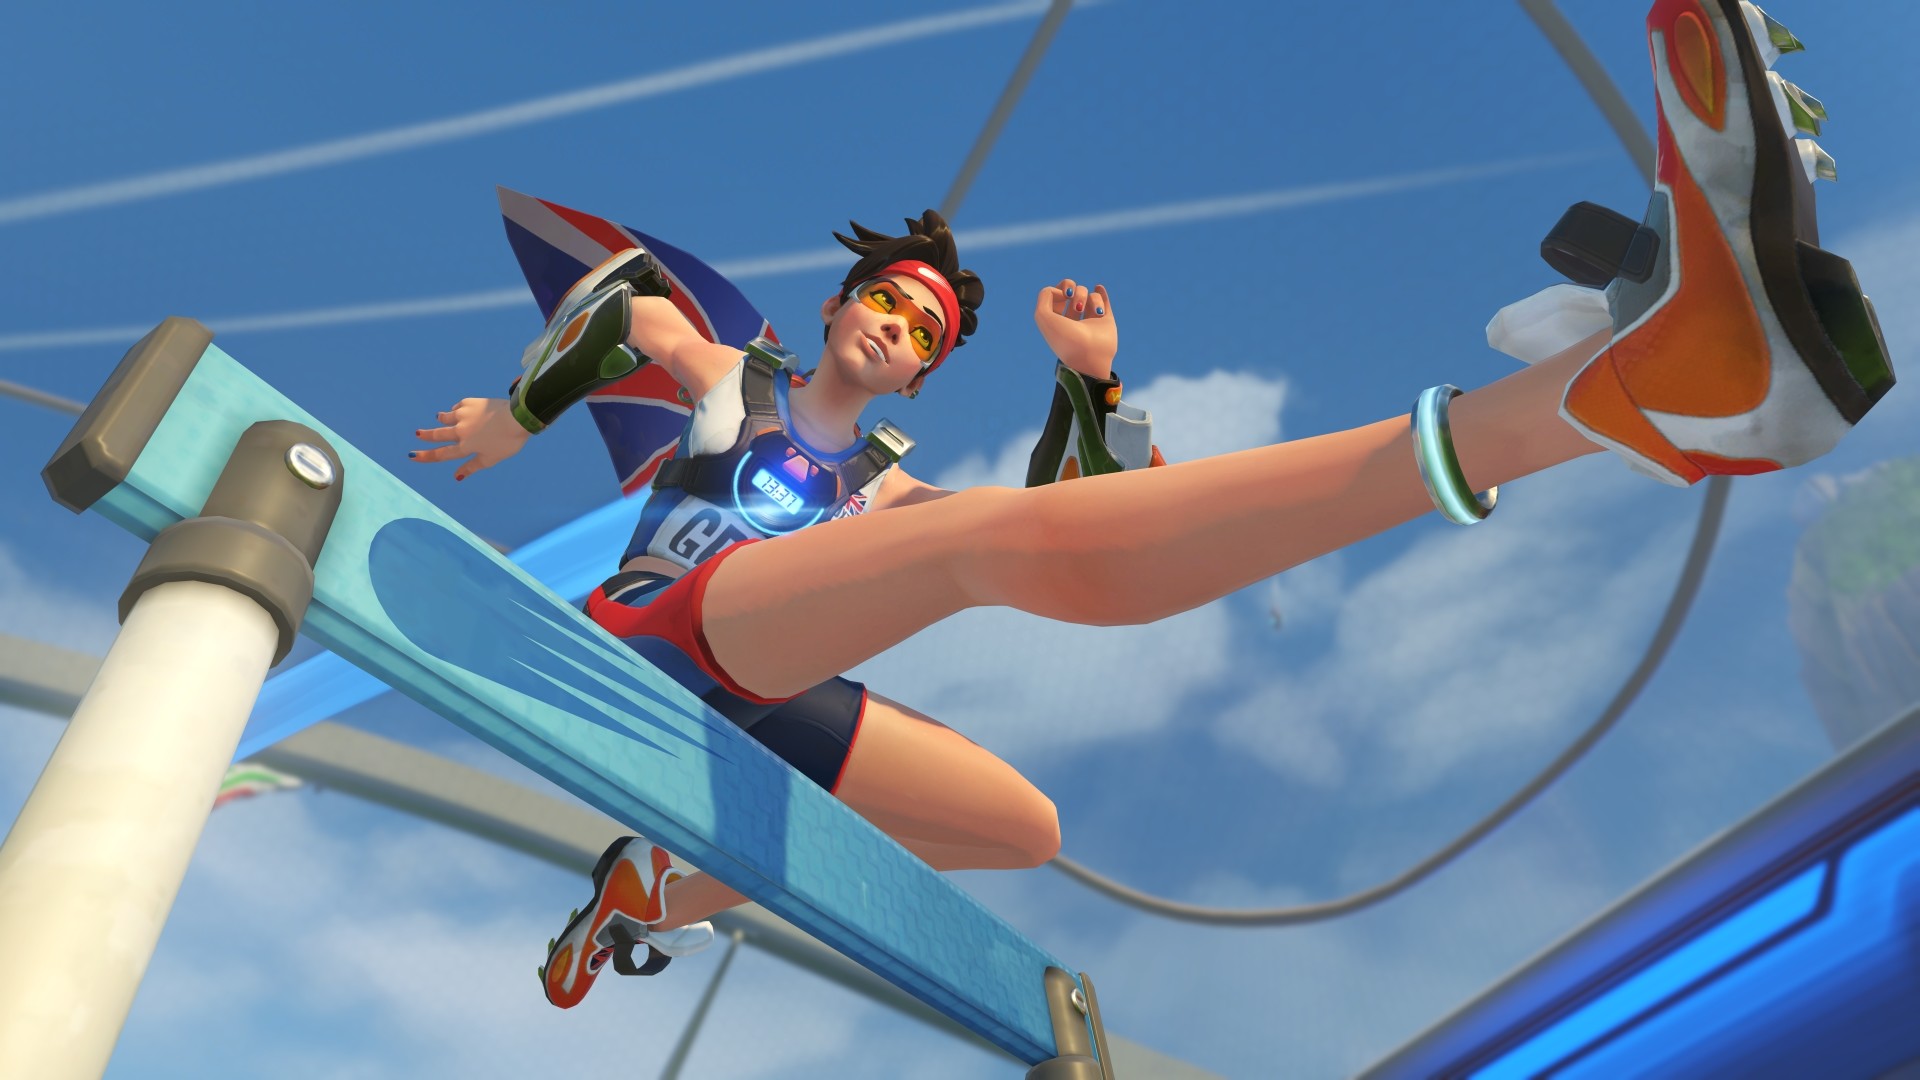 “Summer Games” Are Returned To Overwatch In Improved Form